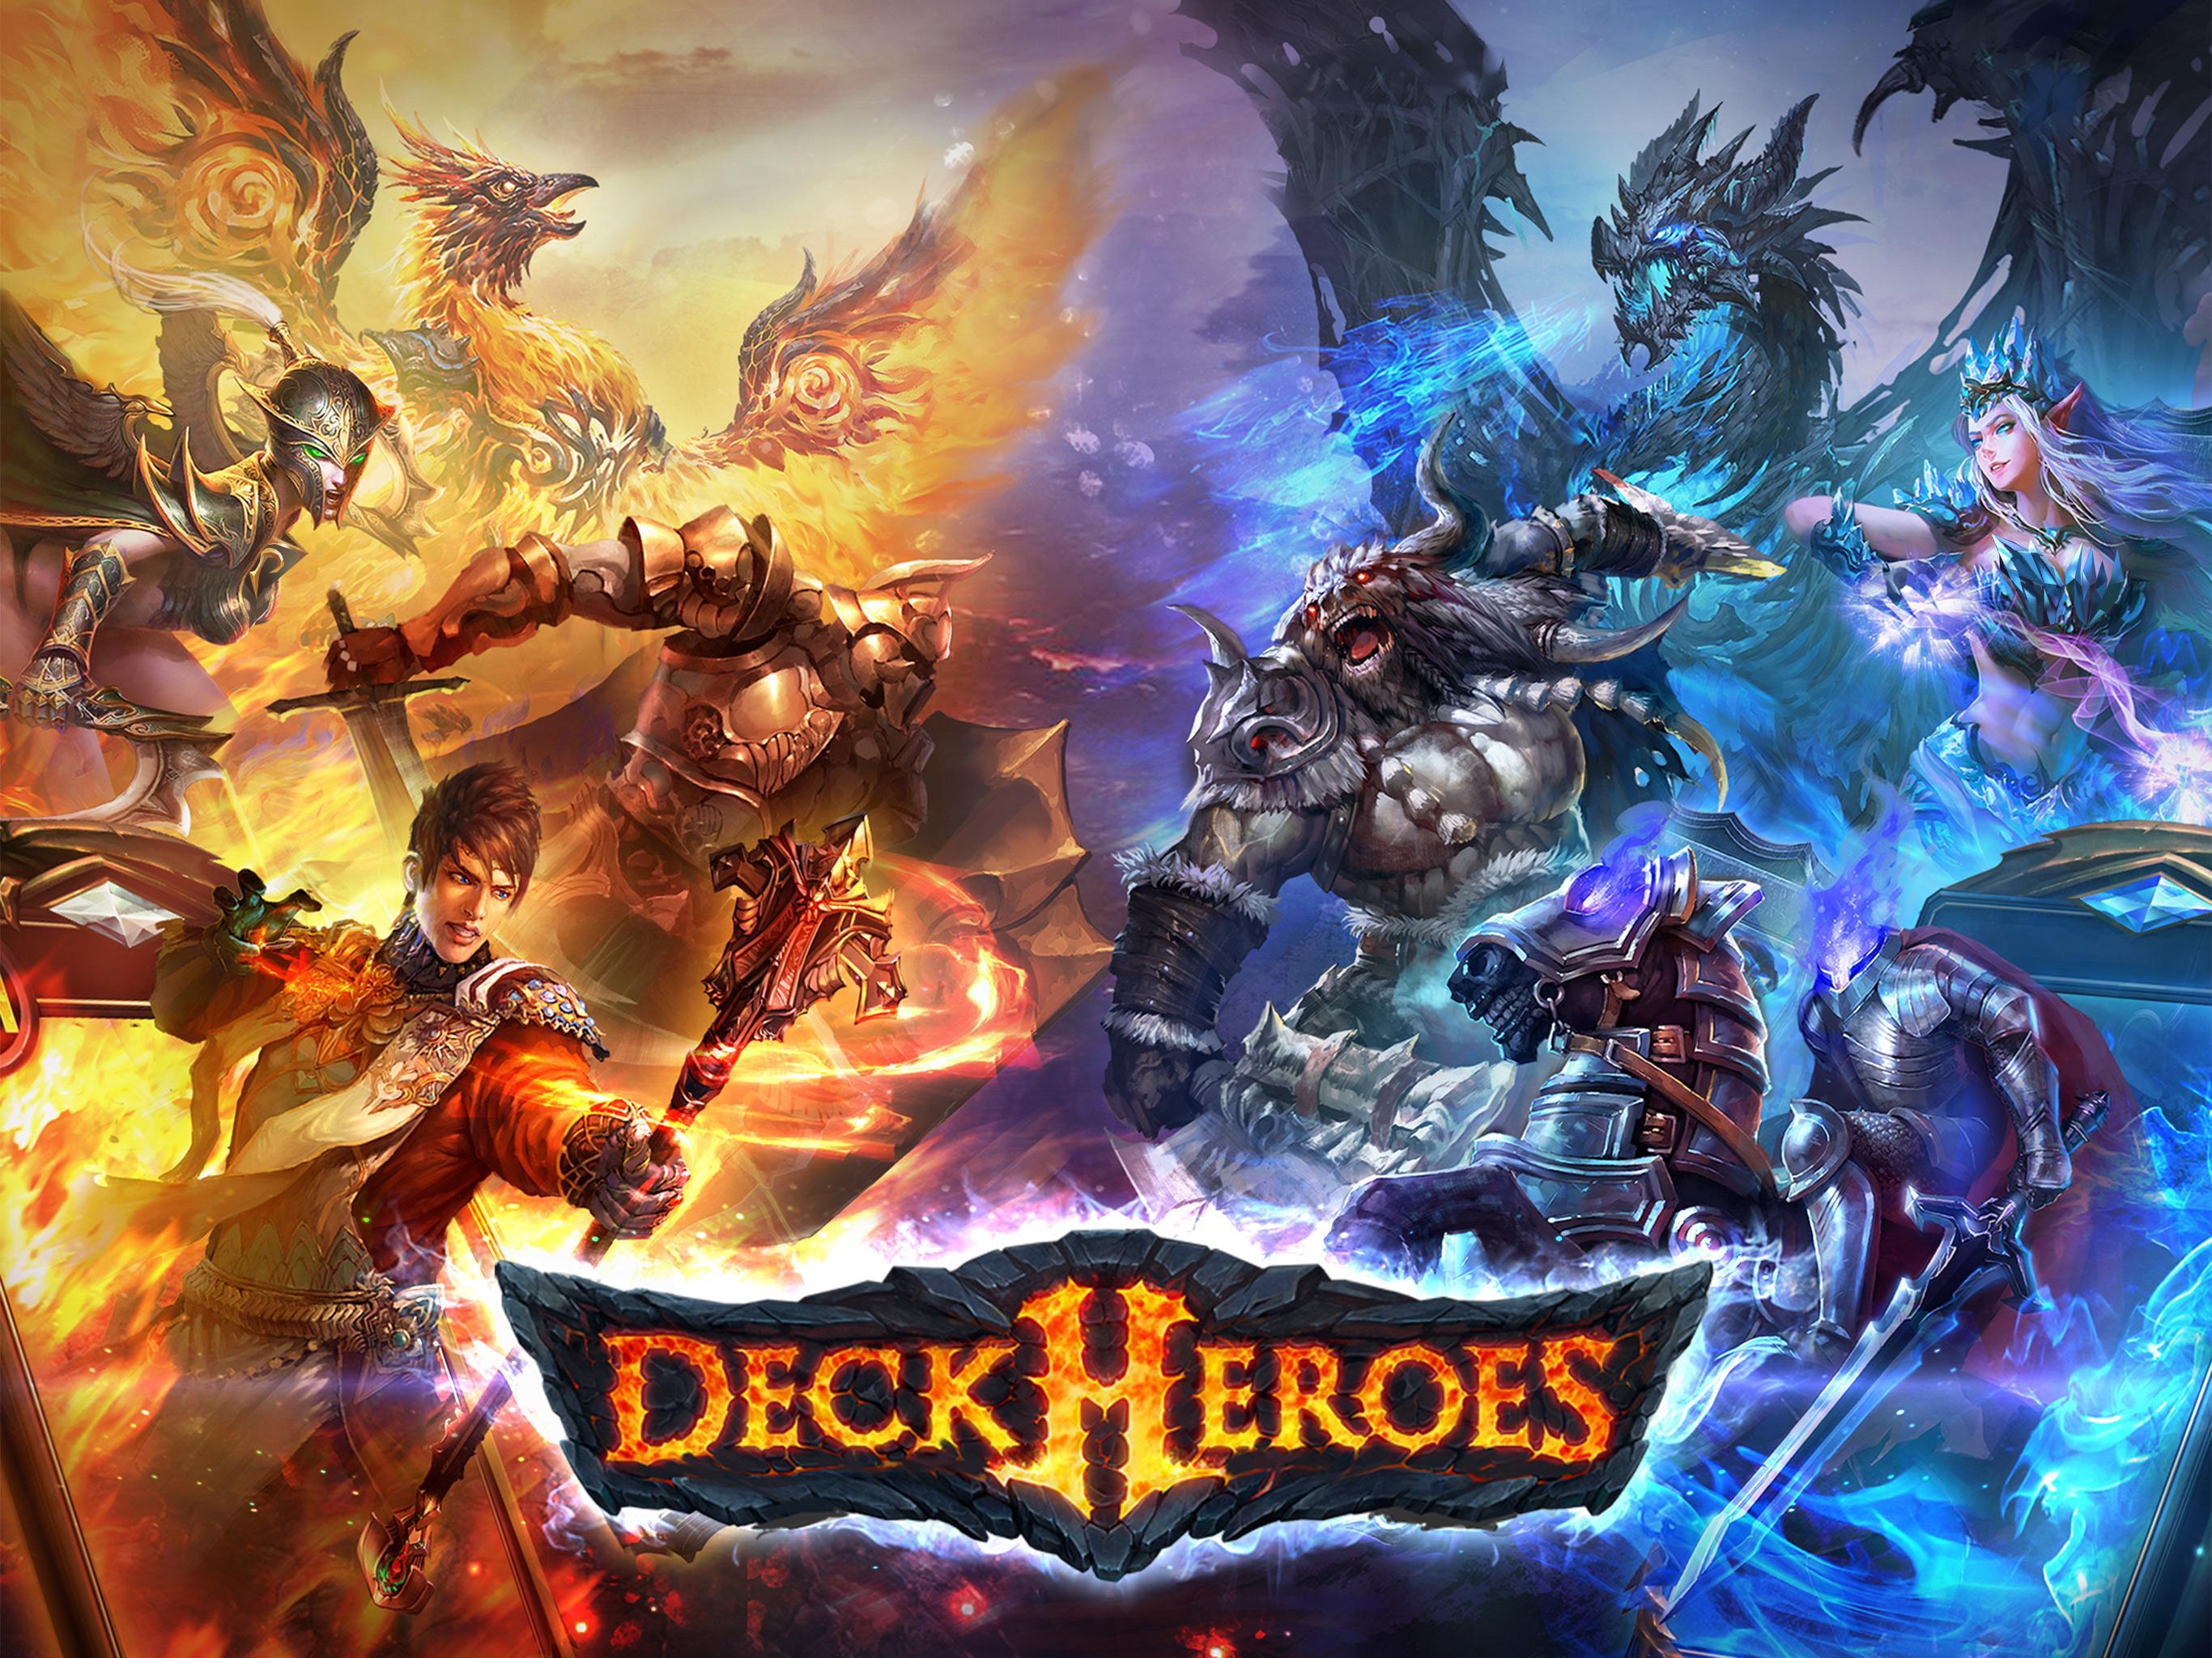 Deck Heroes for Android - APK Download